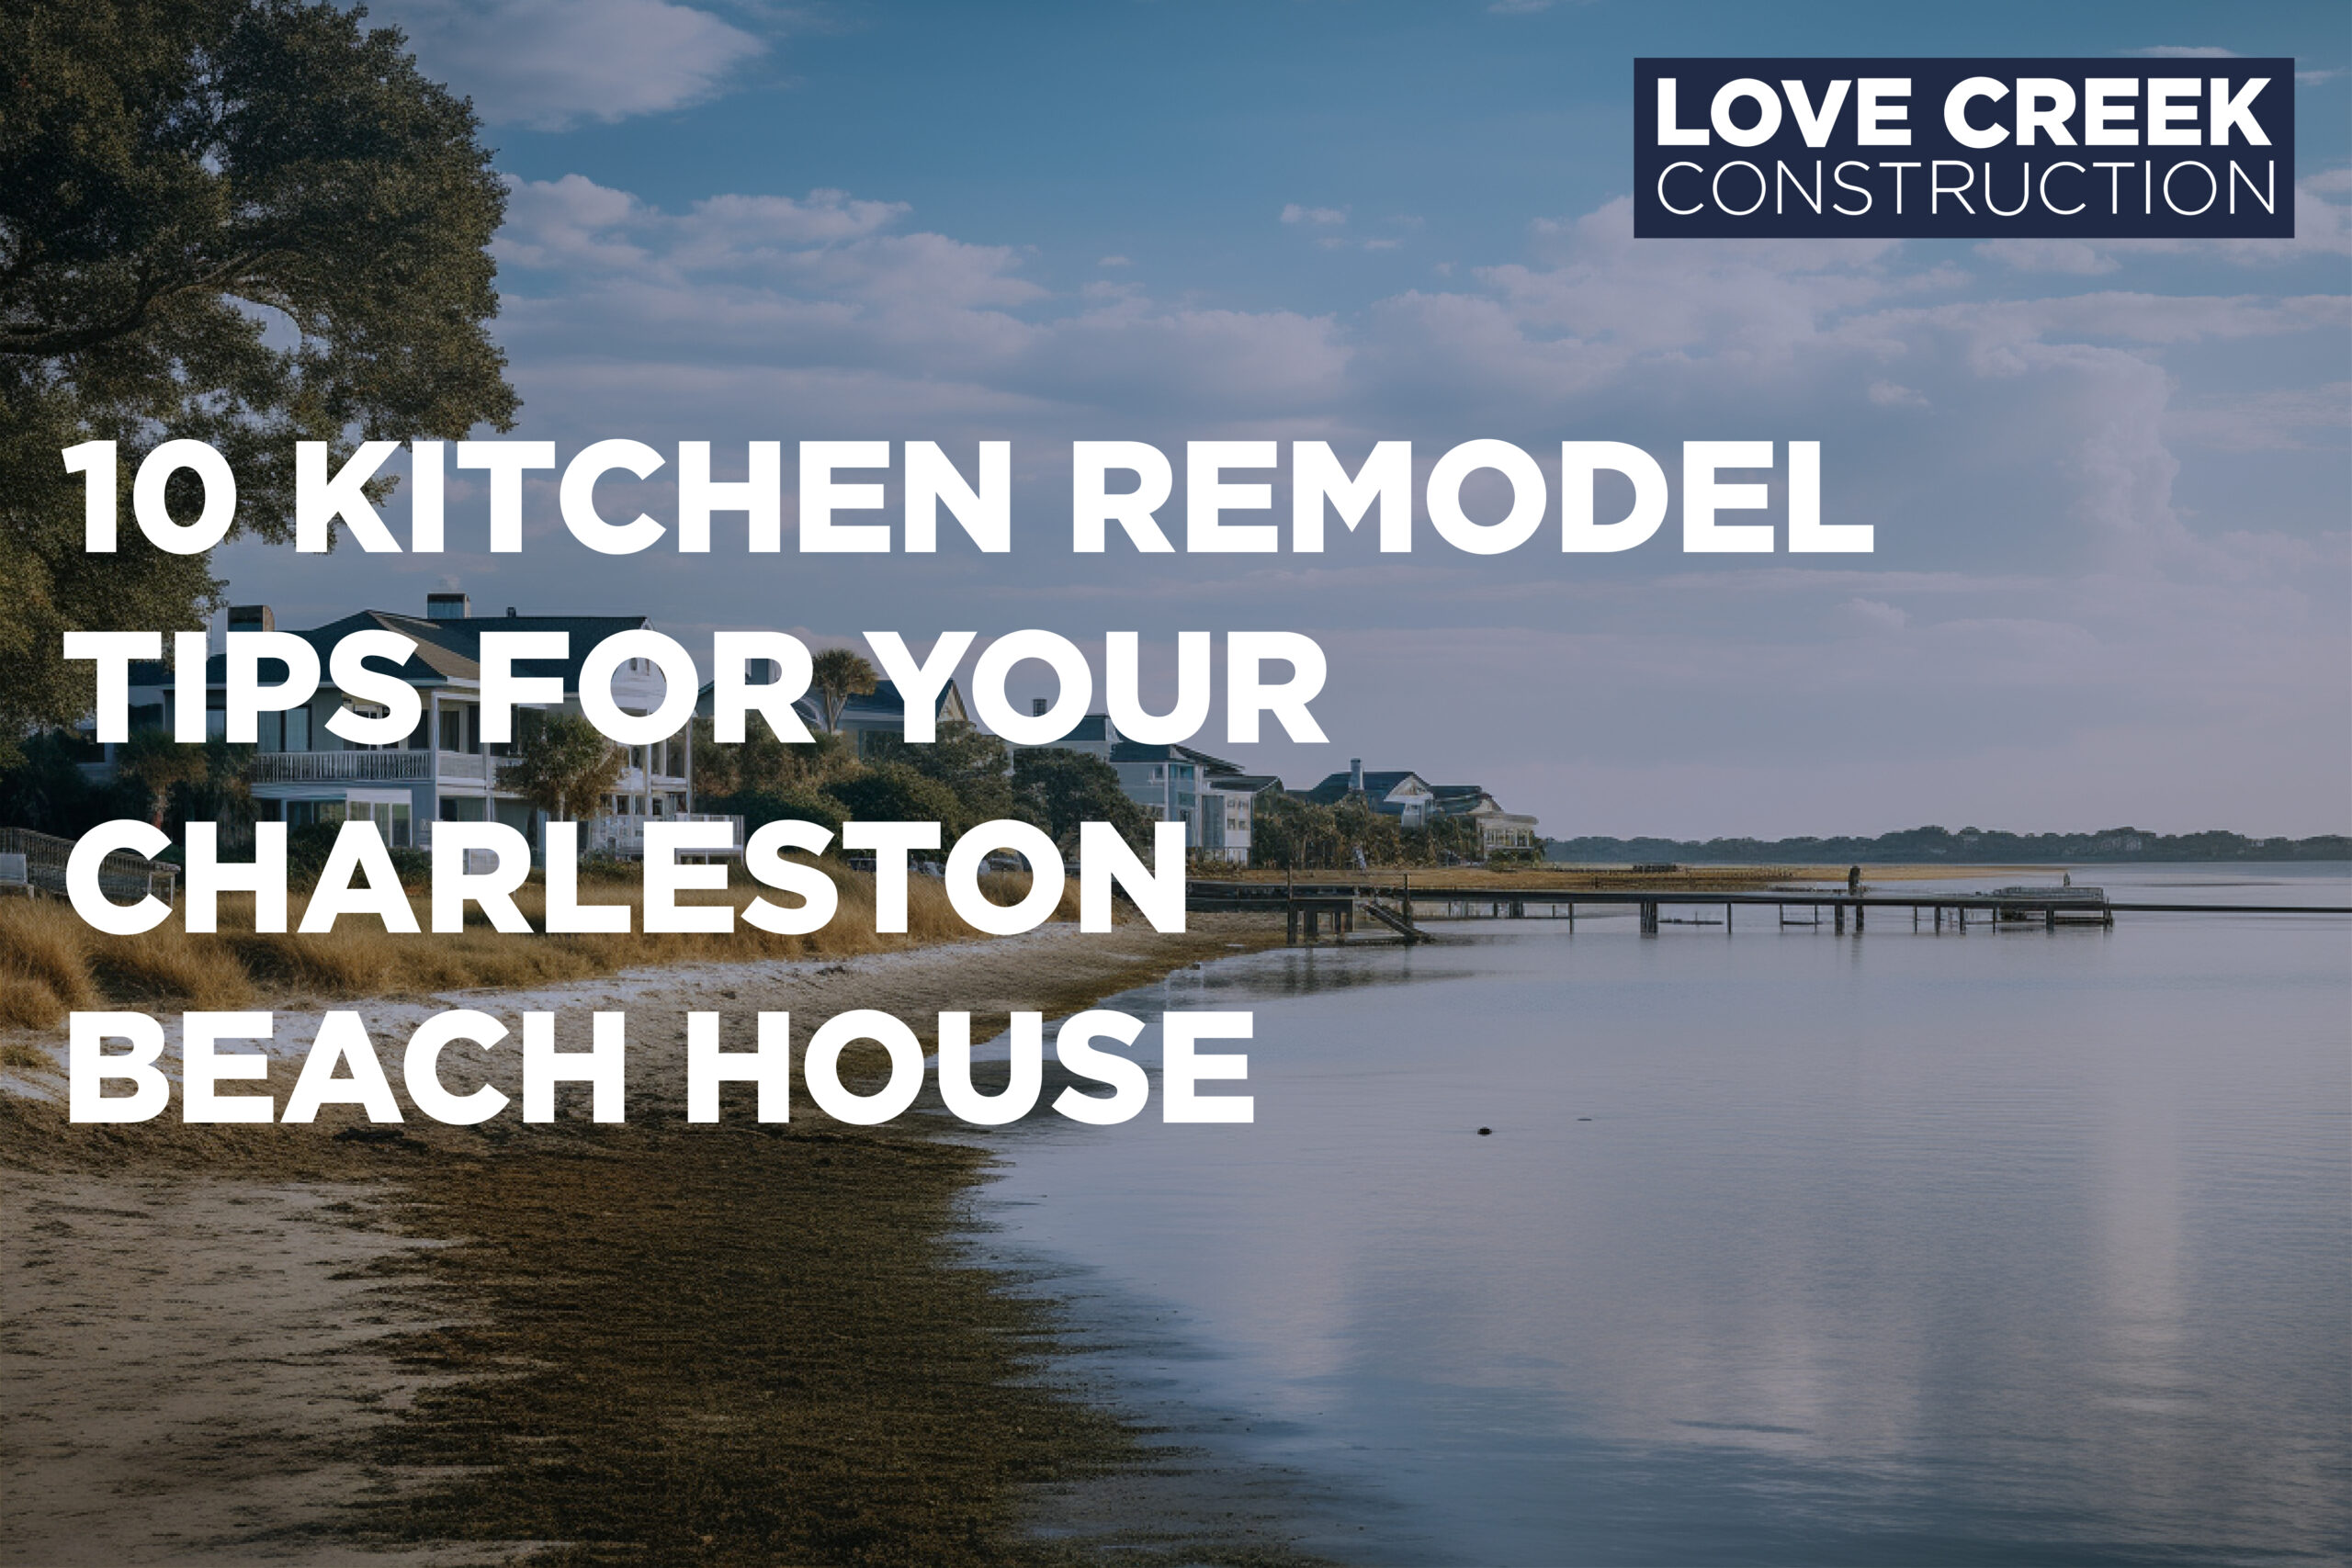 10 Kitchen Remodel Tips for Your Charleston Beach House